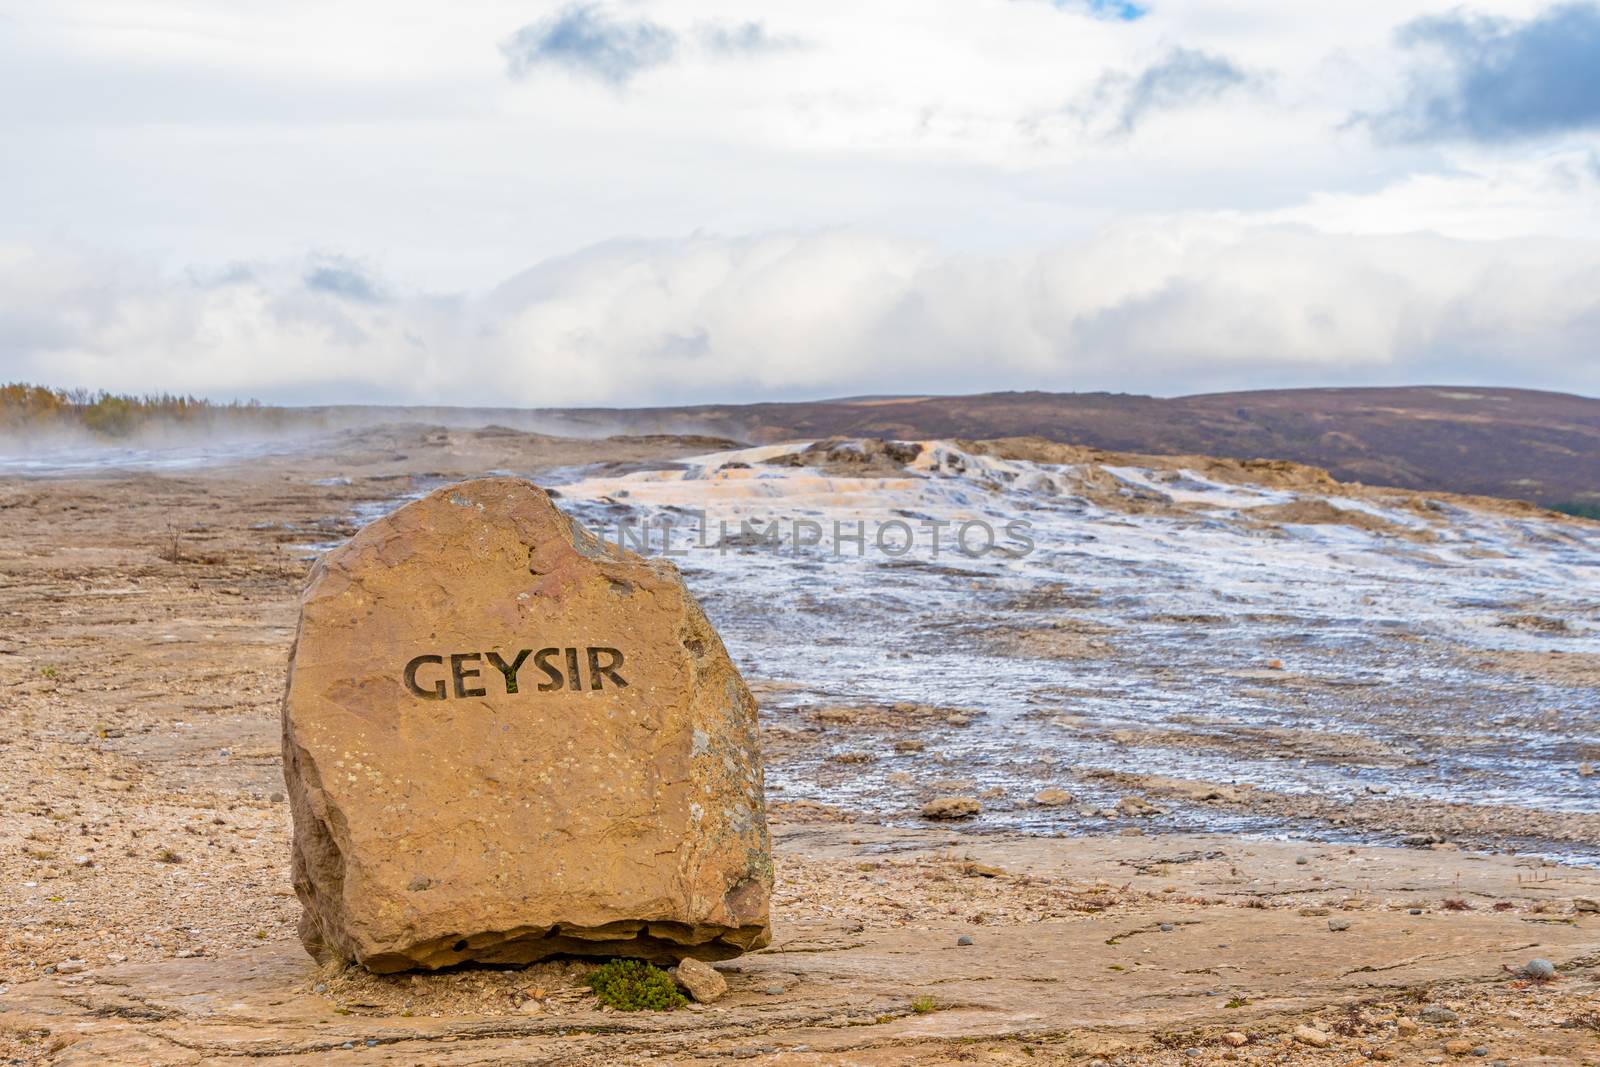 Geysir Golden Circle in Iceland name cut in rock in front of geothermal area by MXW_Stock